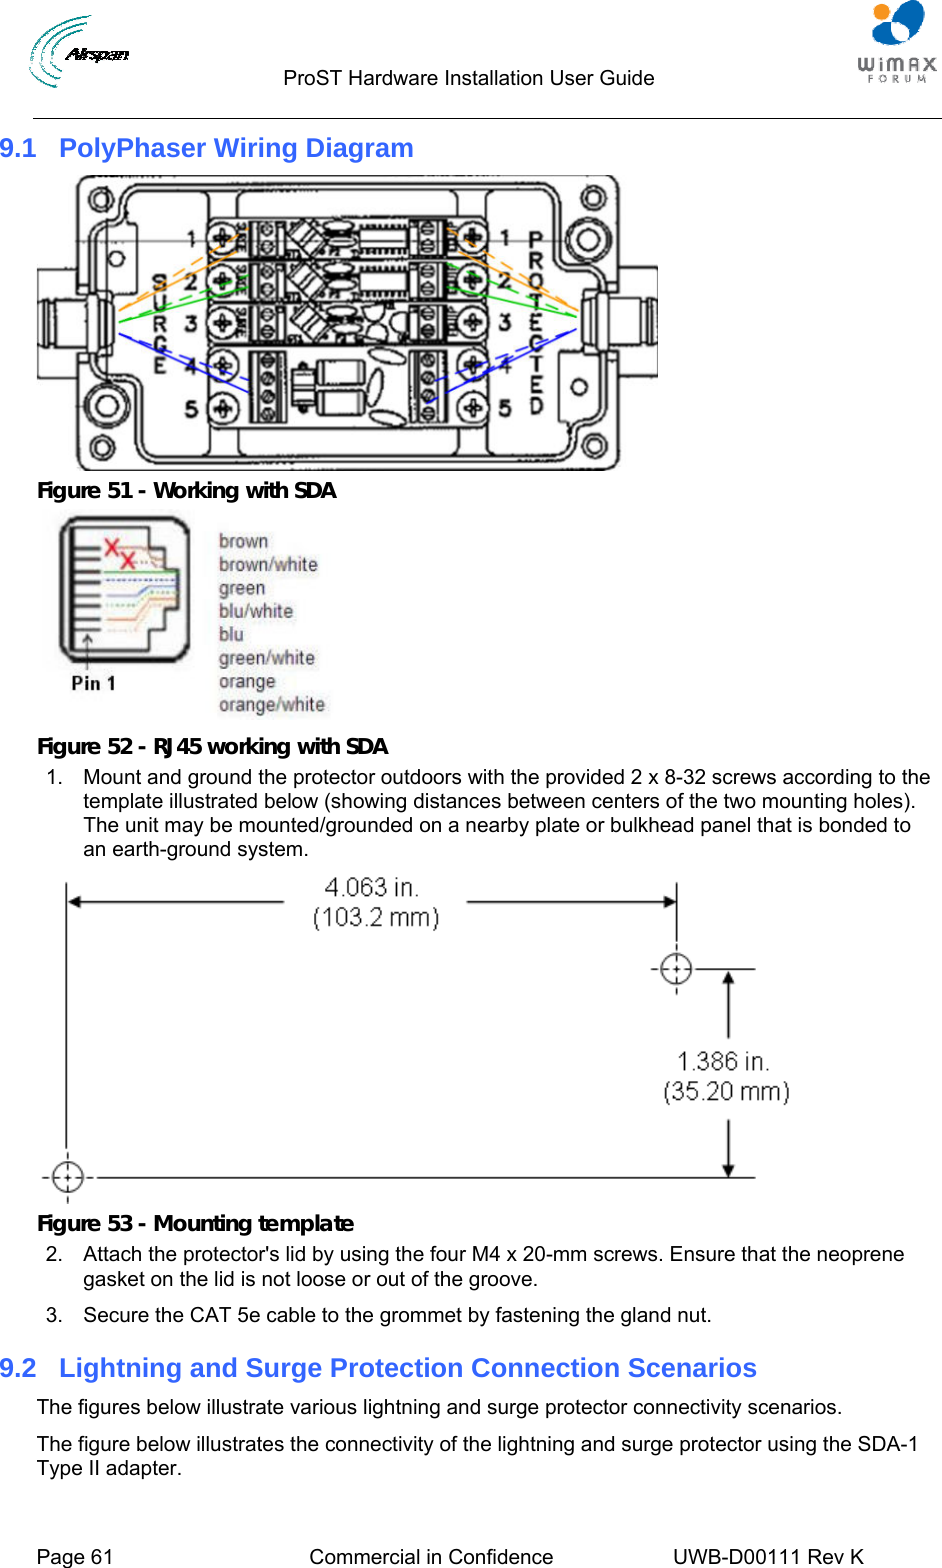                                  ProST Hardware Installation User Guide     Page 61  Commercial in Confidence  UWB-D00111 Rev K   9.1  PolyPhaser Wiring Diagram  Figure 51 - Working with SDA   Figure 52 - RJ45 working with SDA 1.  Mount and ground the protector outdoors with the provided 2 x 8-32 screws according to the template illustrated below (showing distances between centers of the two mounting holes). The unit may be mounted/grounded on a nearby plate or bulkhead panel that is bonded to an earth-ground system.  Figure 53 - Mounting template 2.  Attach the protector&apos;s lid by using the four M4 x 20-mm screws. Ensure that the neoprene gasket on the lid is not loose or out of the groove. 3.  Secure the CAT 5e cable to the grommet by fastening the gland nut. 9.2  Lightning and Surge Protection Connection Scenarios The figures below illustrate various lightning and surge protector connectivity scenarios. The figure below illustrates the connectivity of the lightning and surge protector using the SDA-1 Type II adapter. 